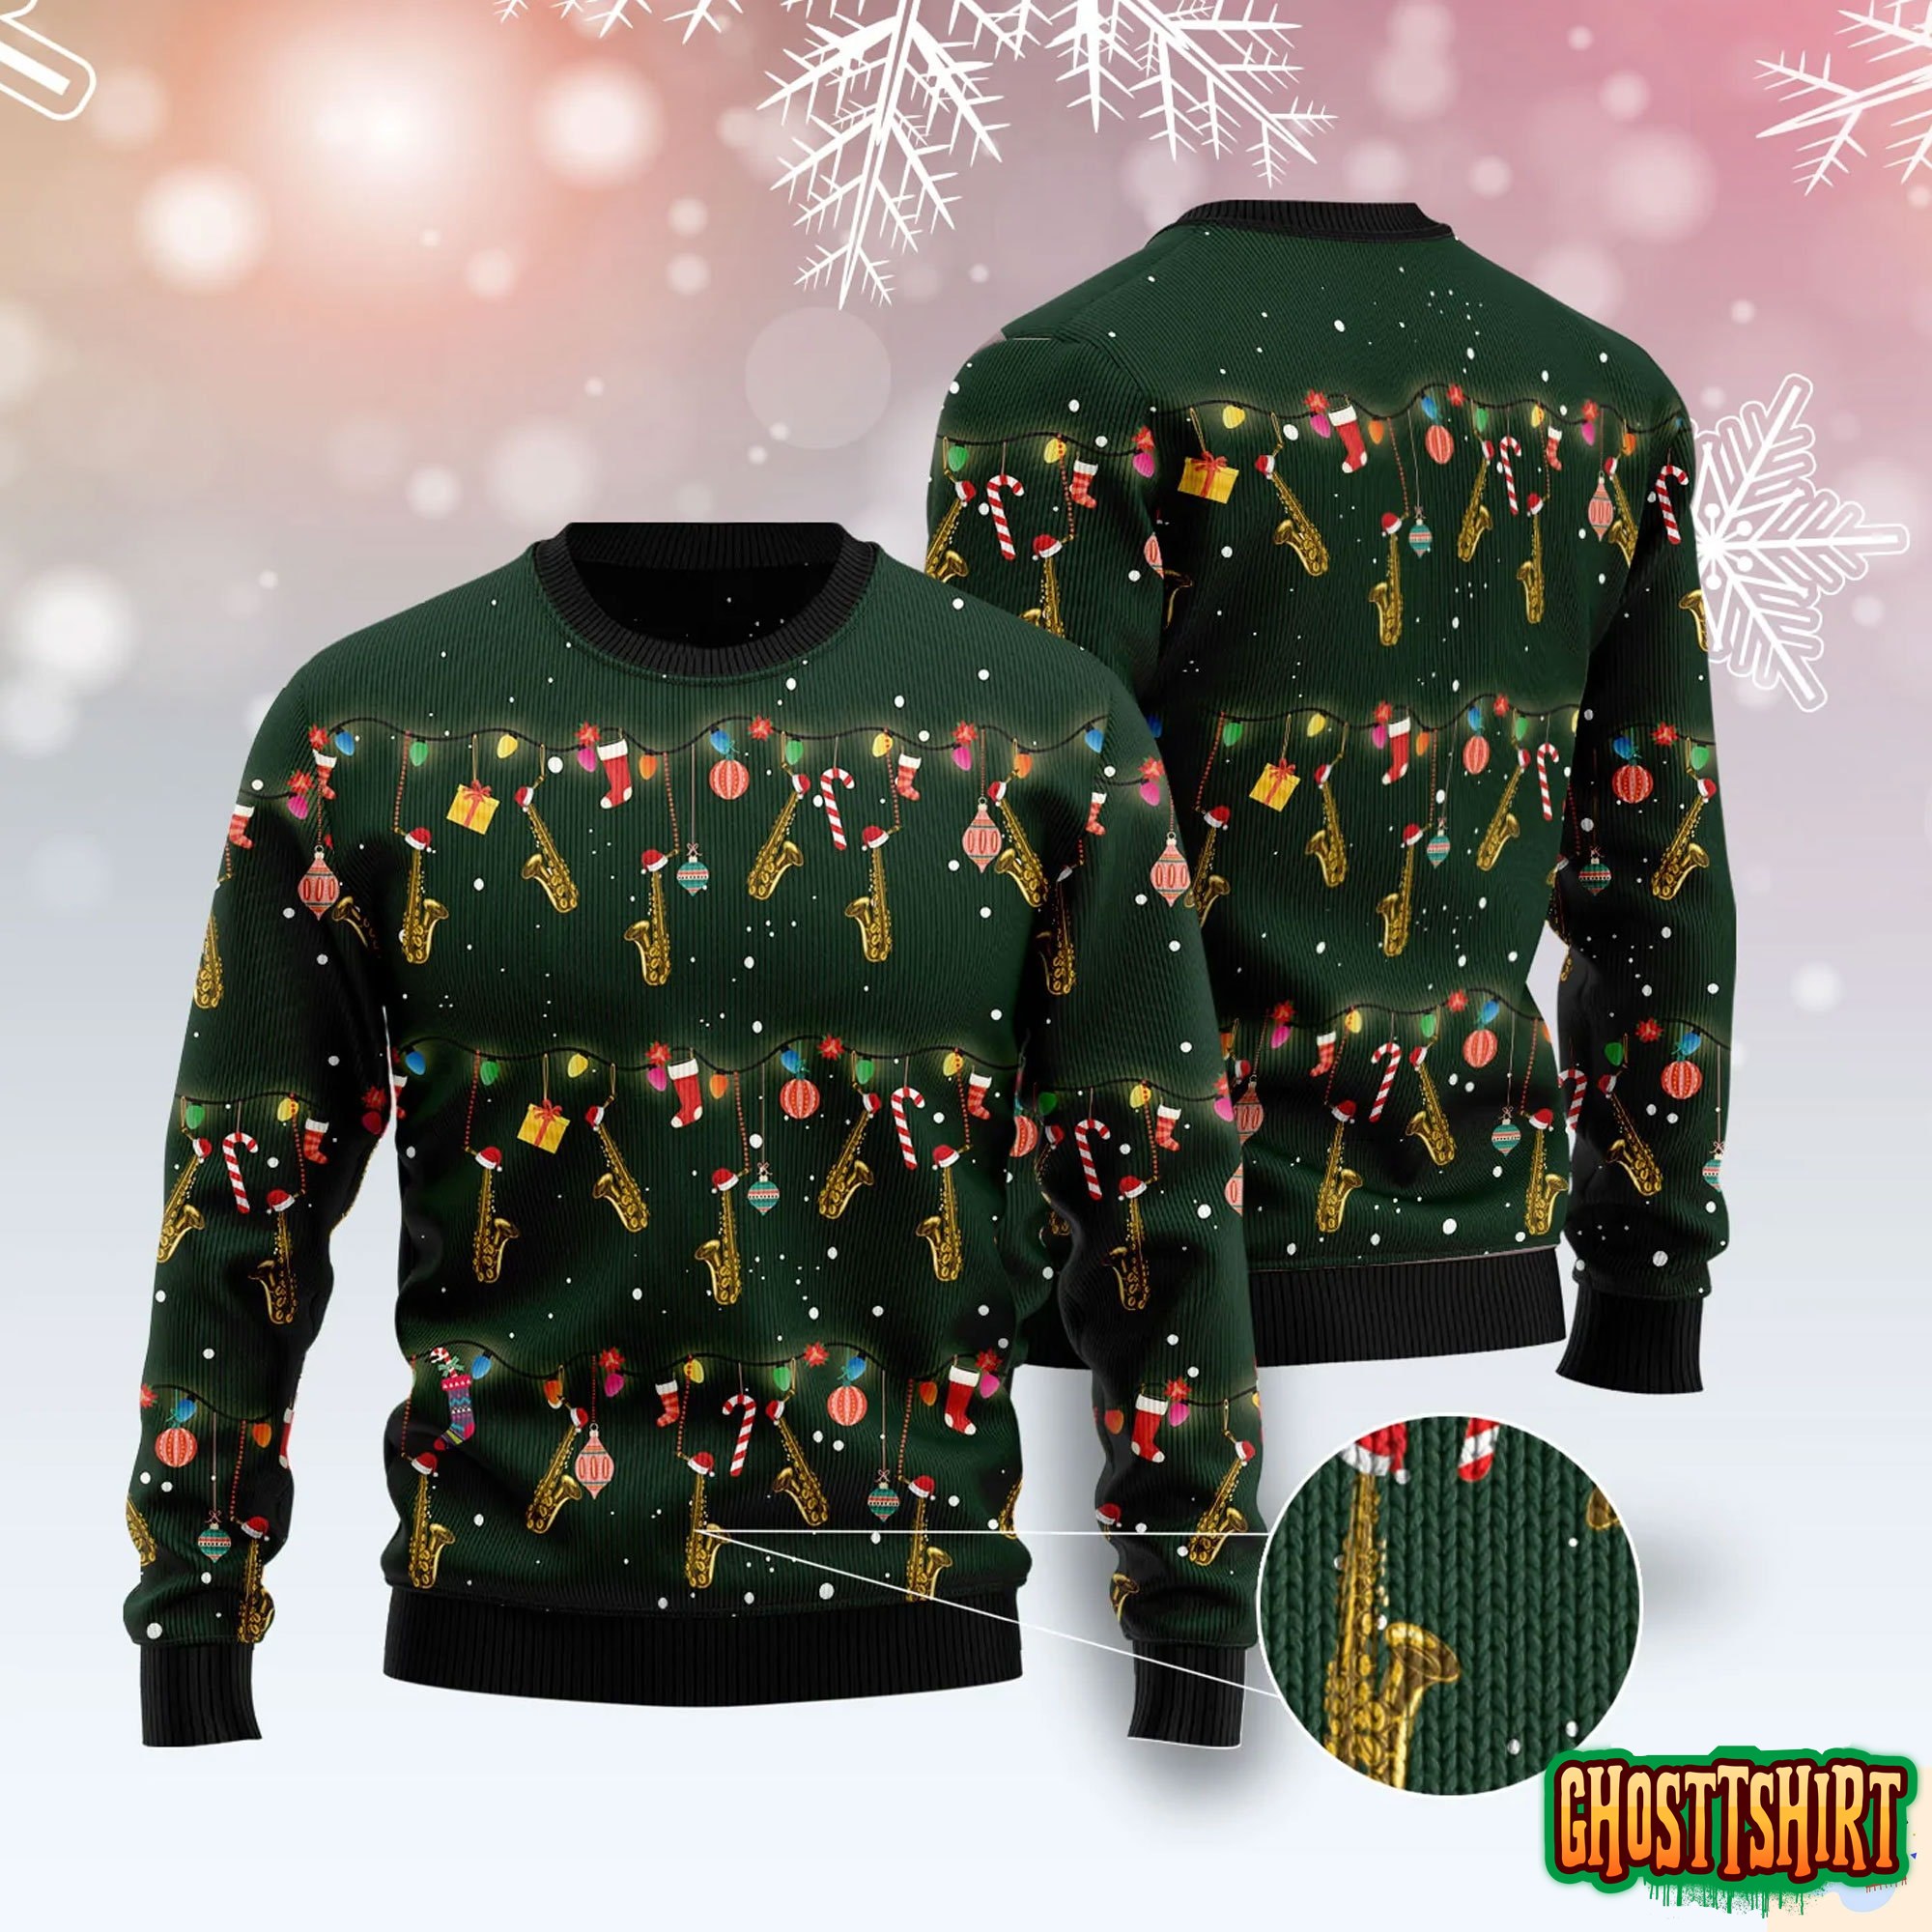 Instrument Saxophone Ugly Christmas Sweater